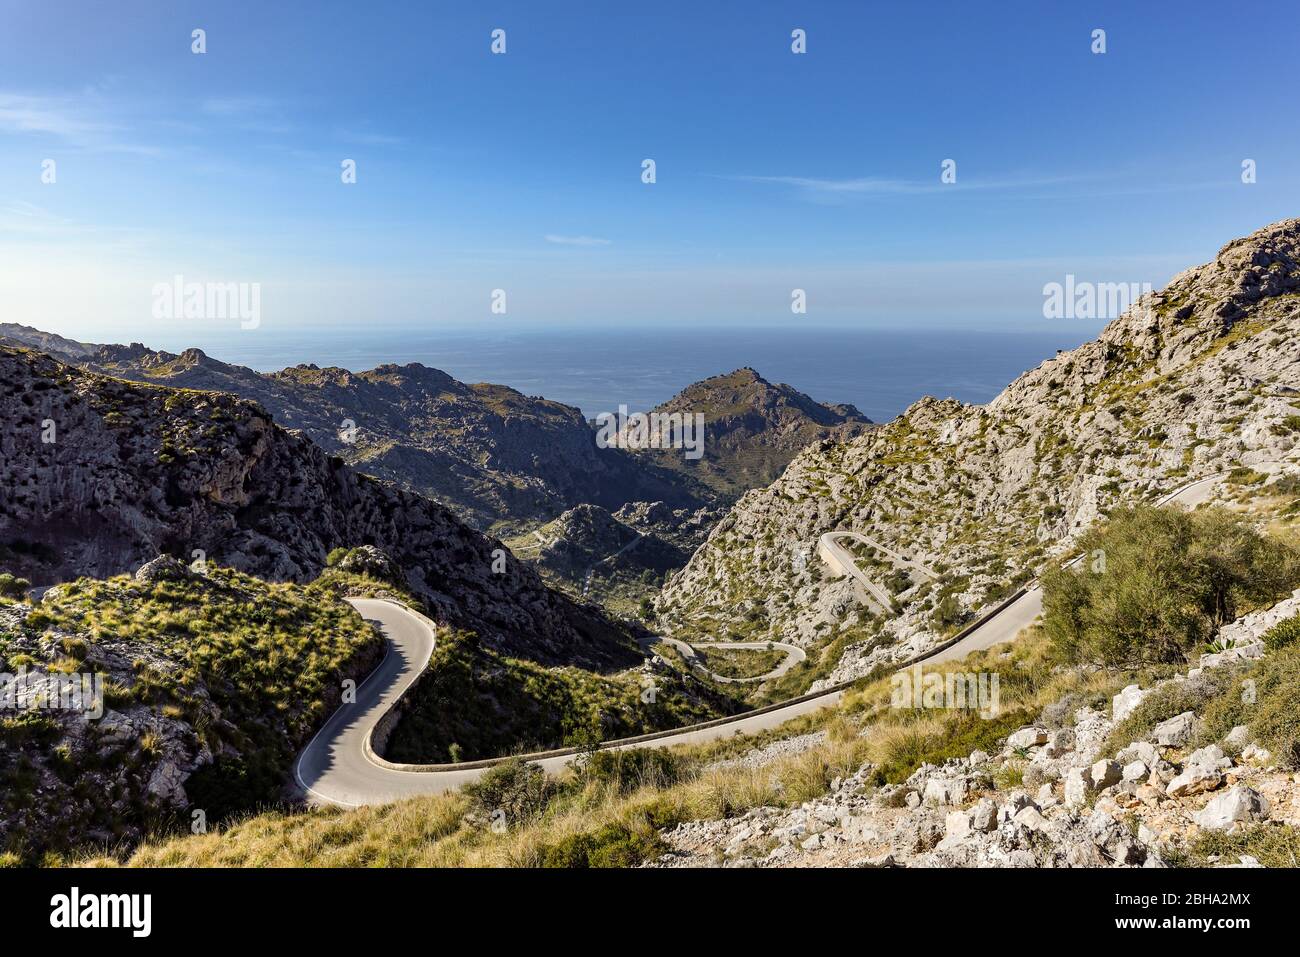 View of the serpentine road with its many curves in the rocky Tramuntana mountains in Mallorca from above, in the background the Mediterranean sea Stock Photo